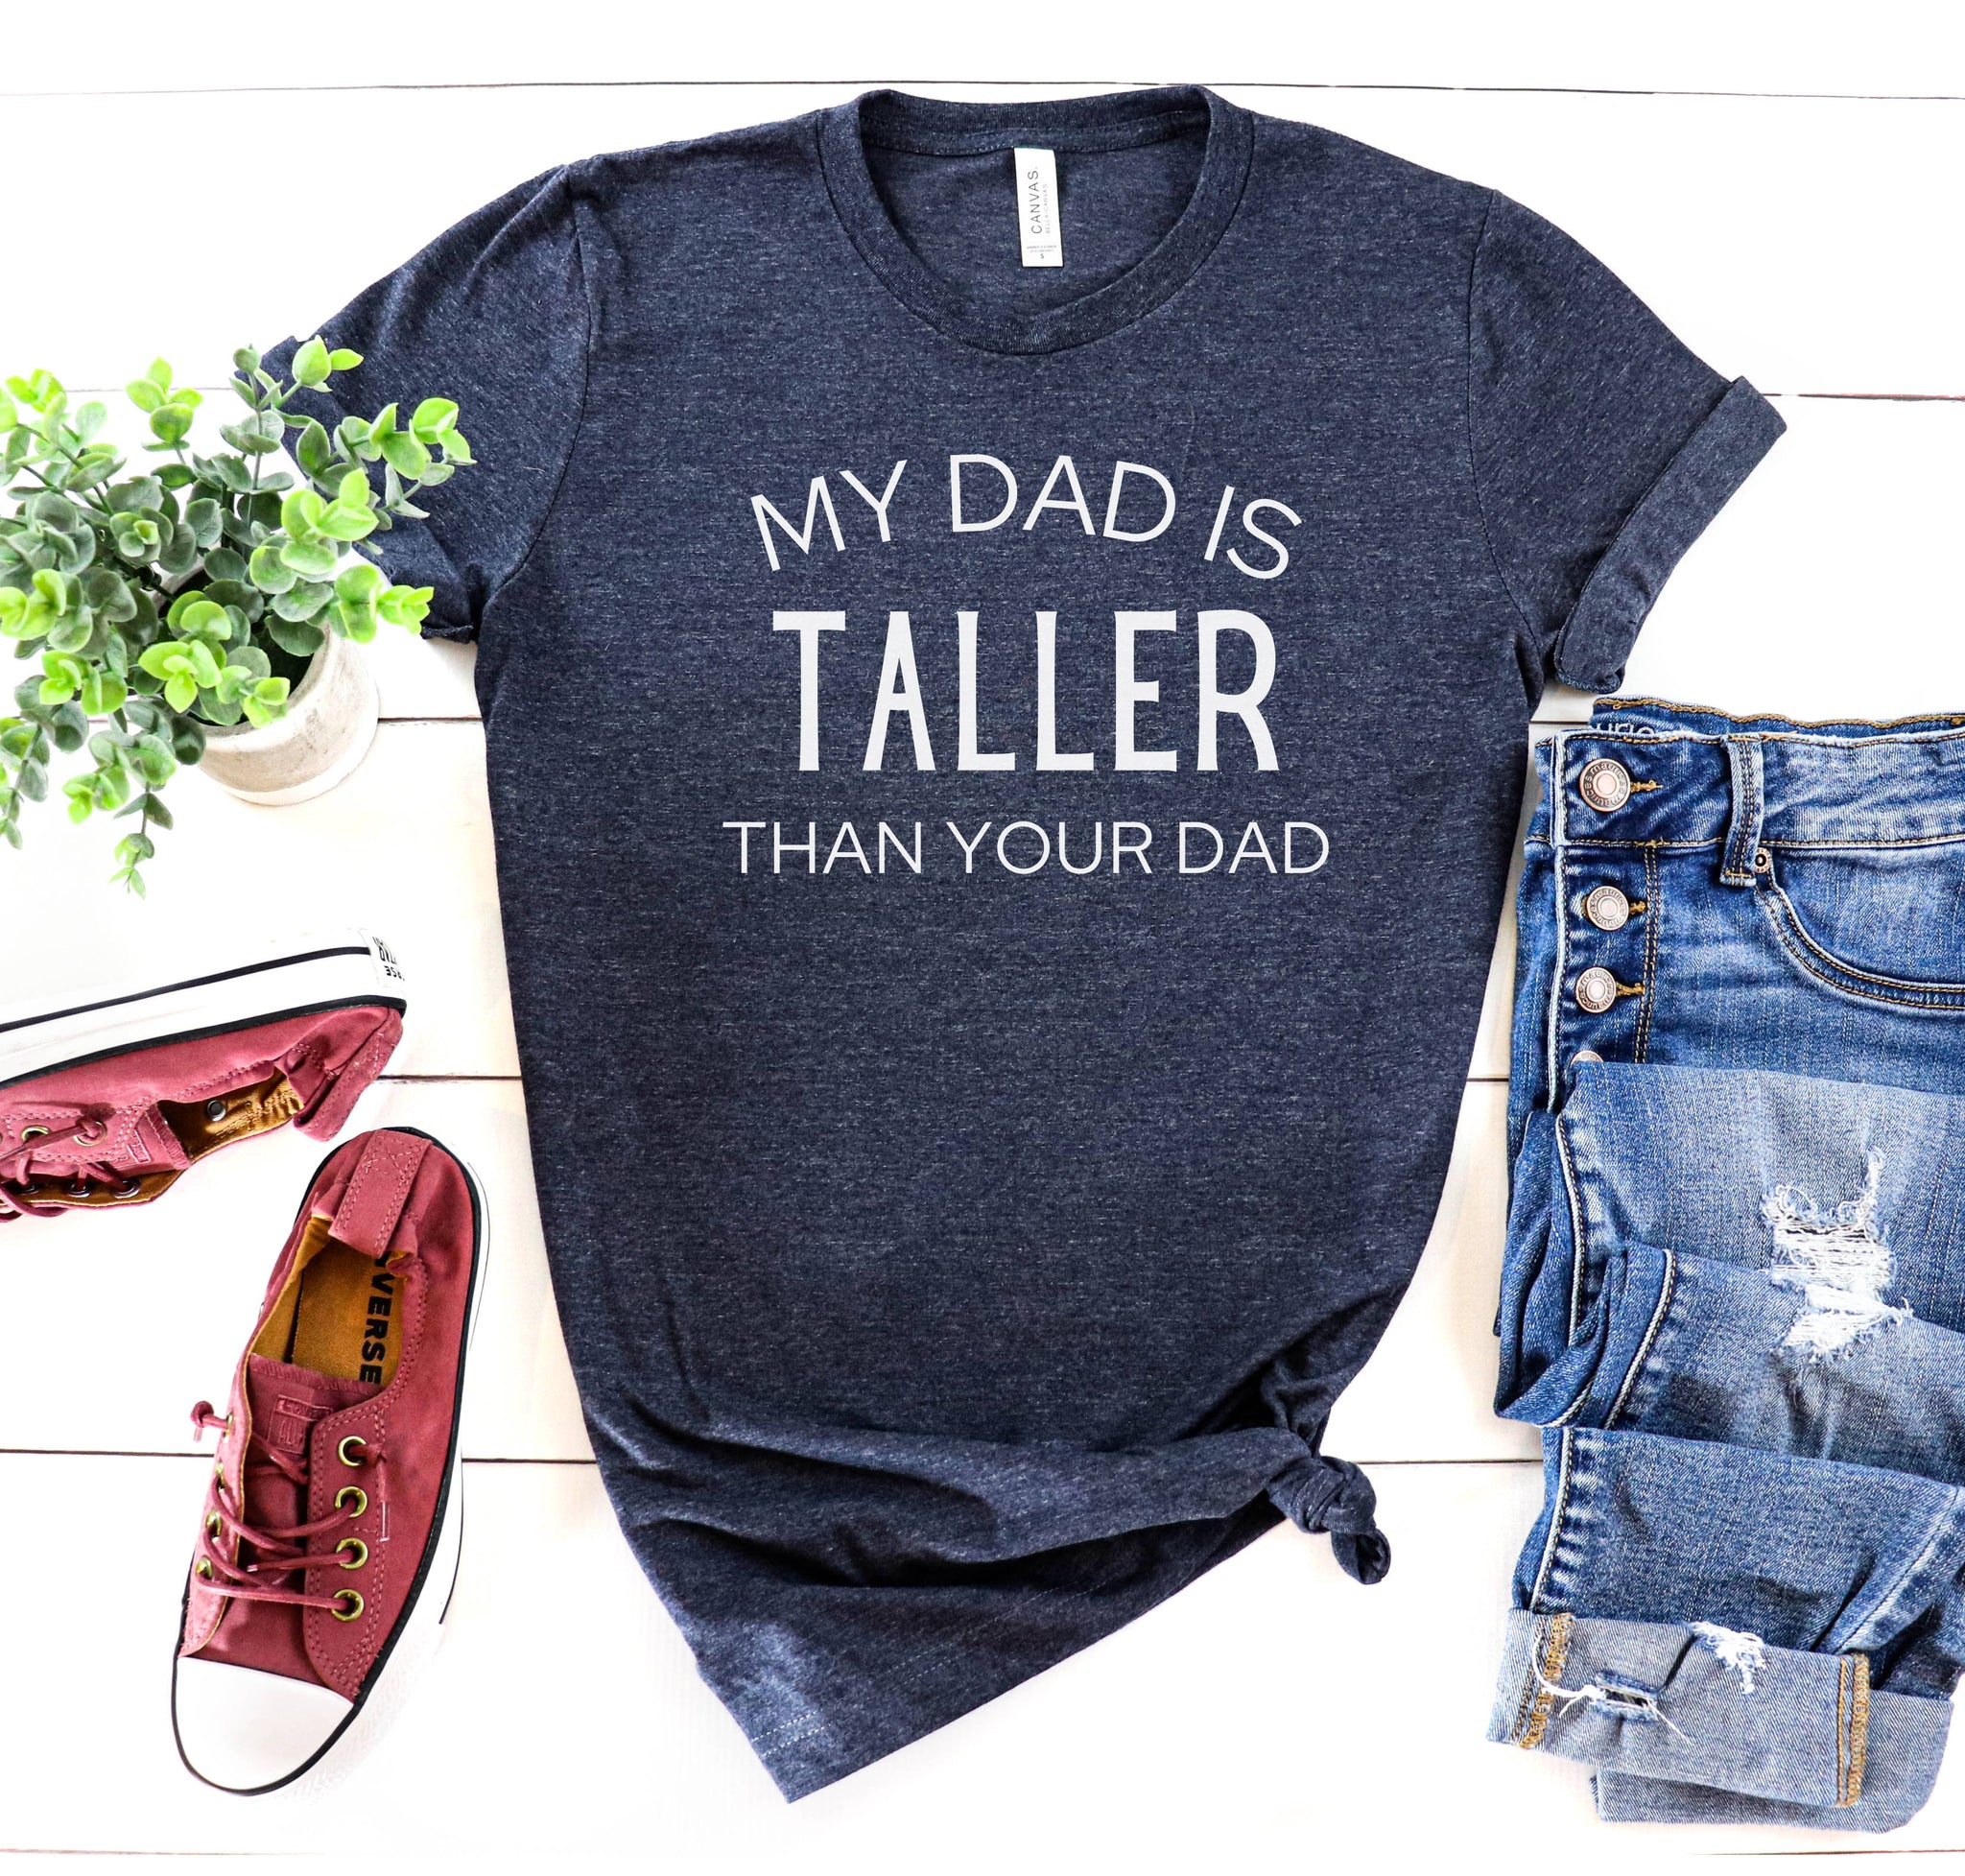 My Dad is Taller Than Your Dad funny t-shirt.